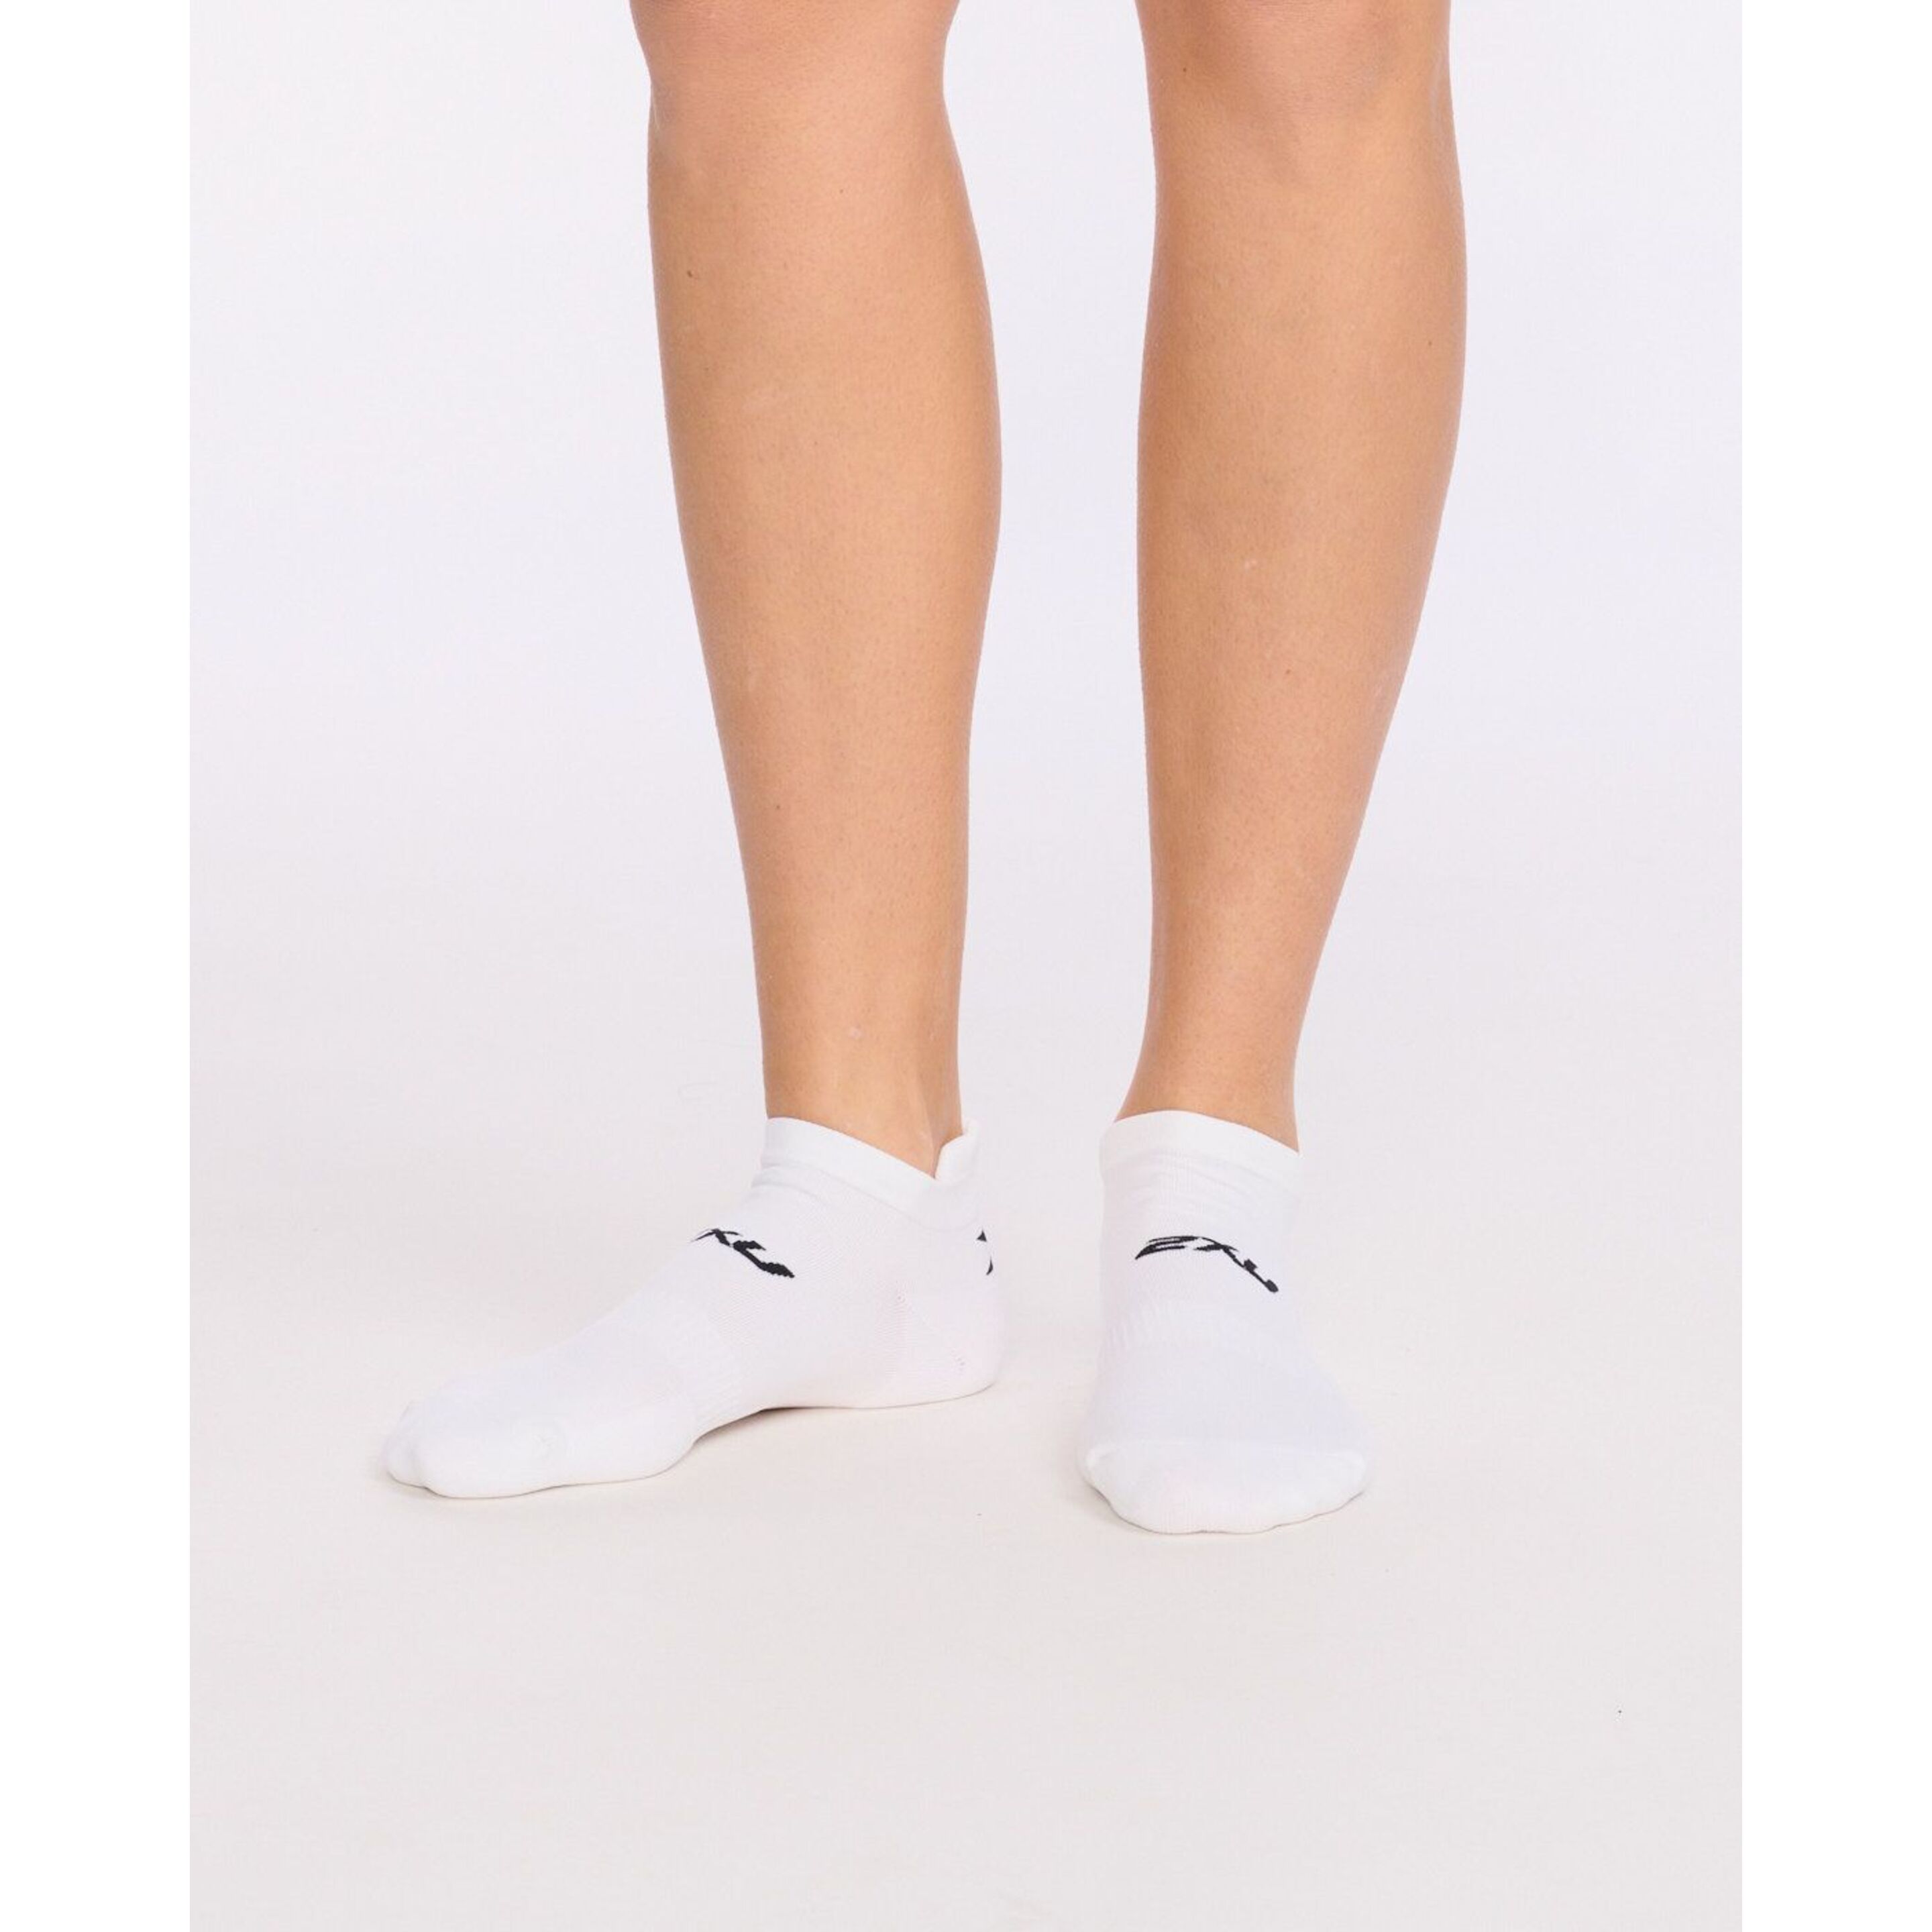 Calcetines 2xu Ankle